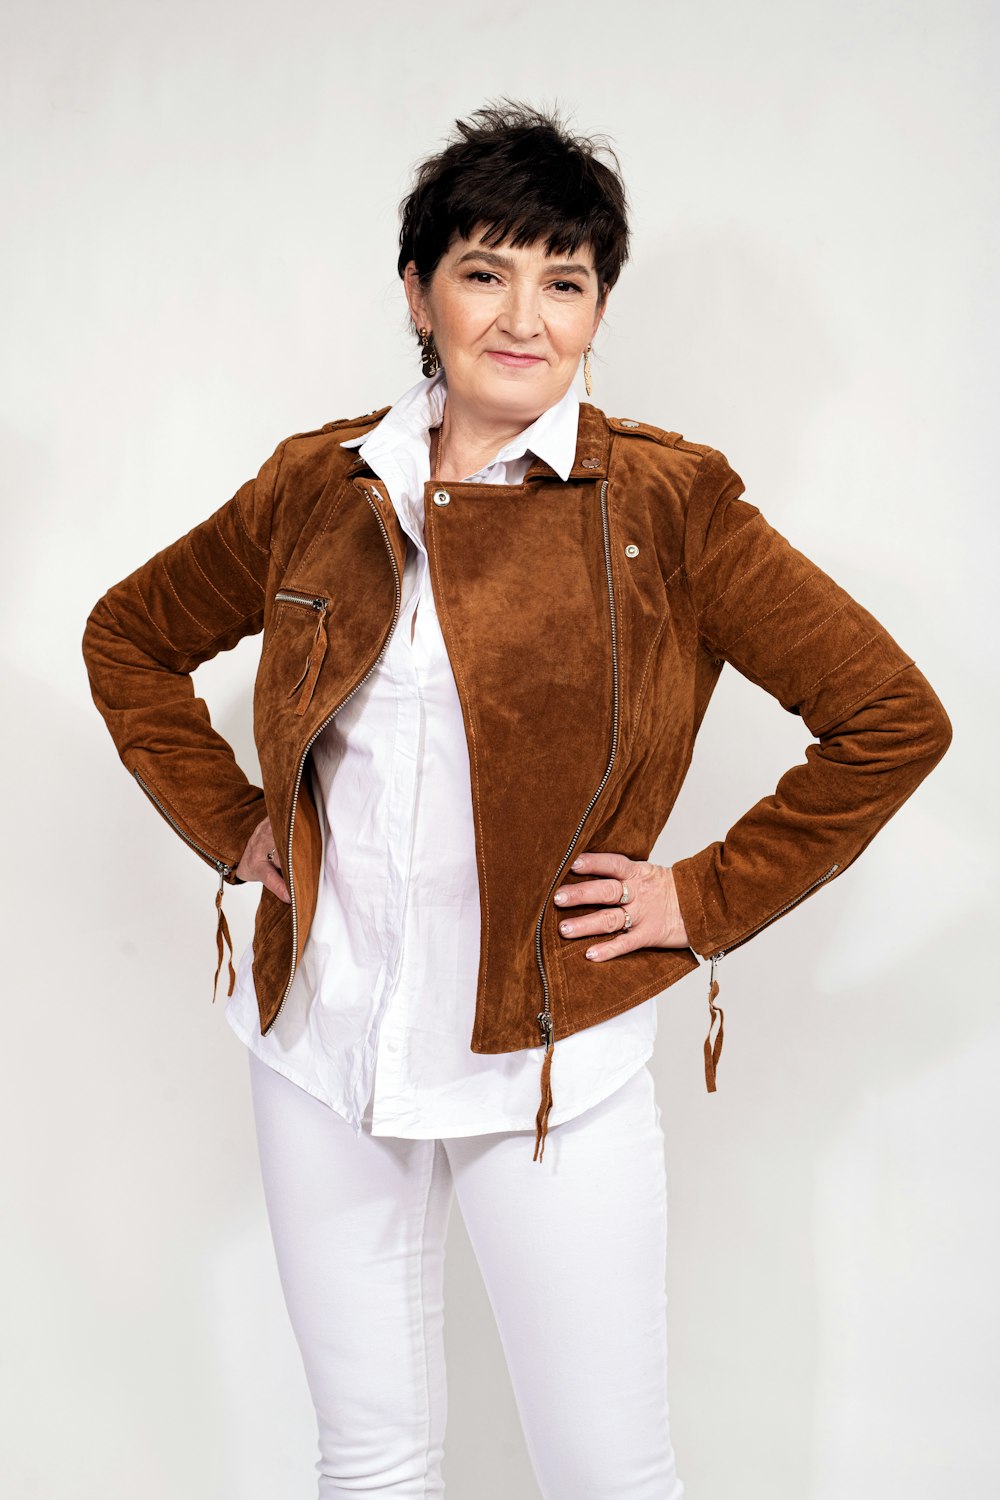 a woman in white pants and a brown jacket